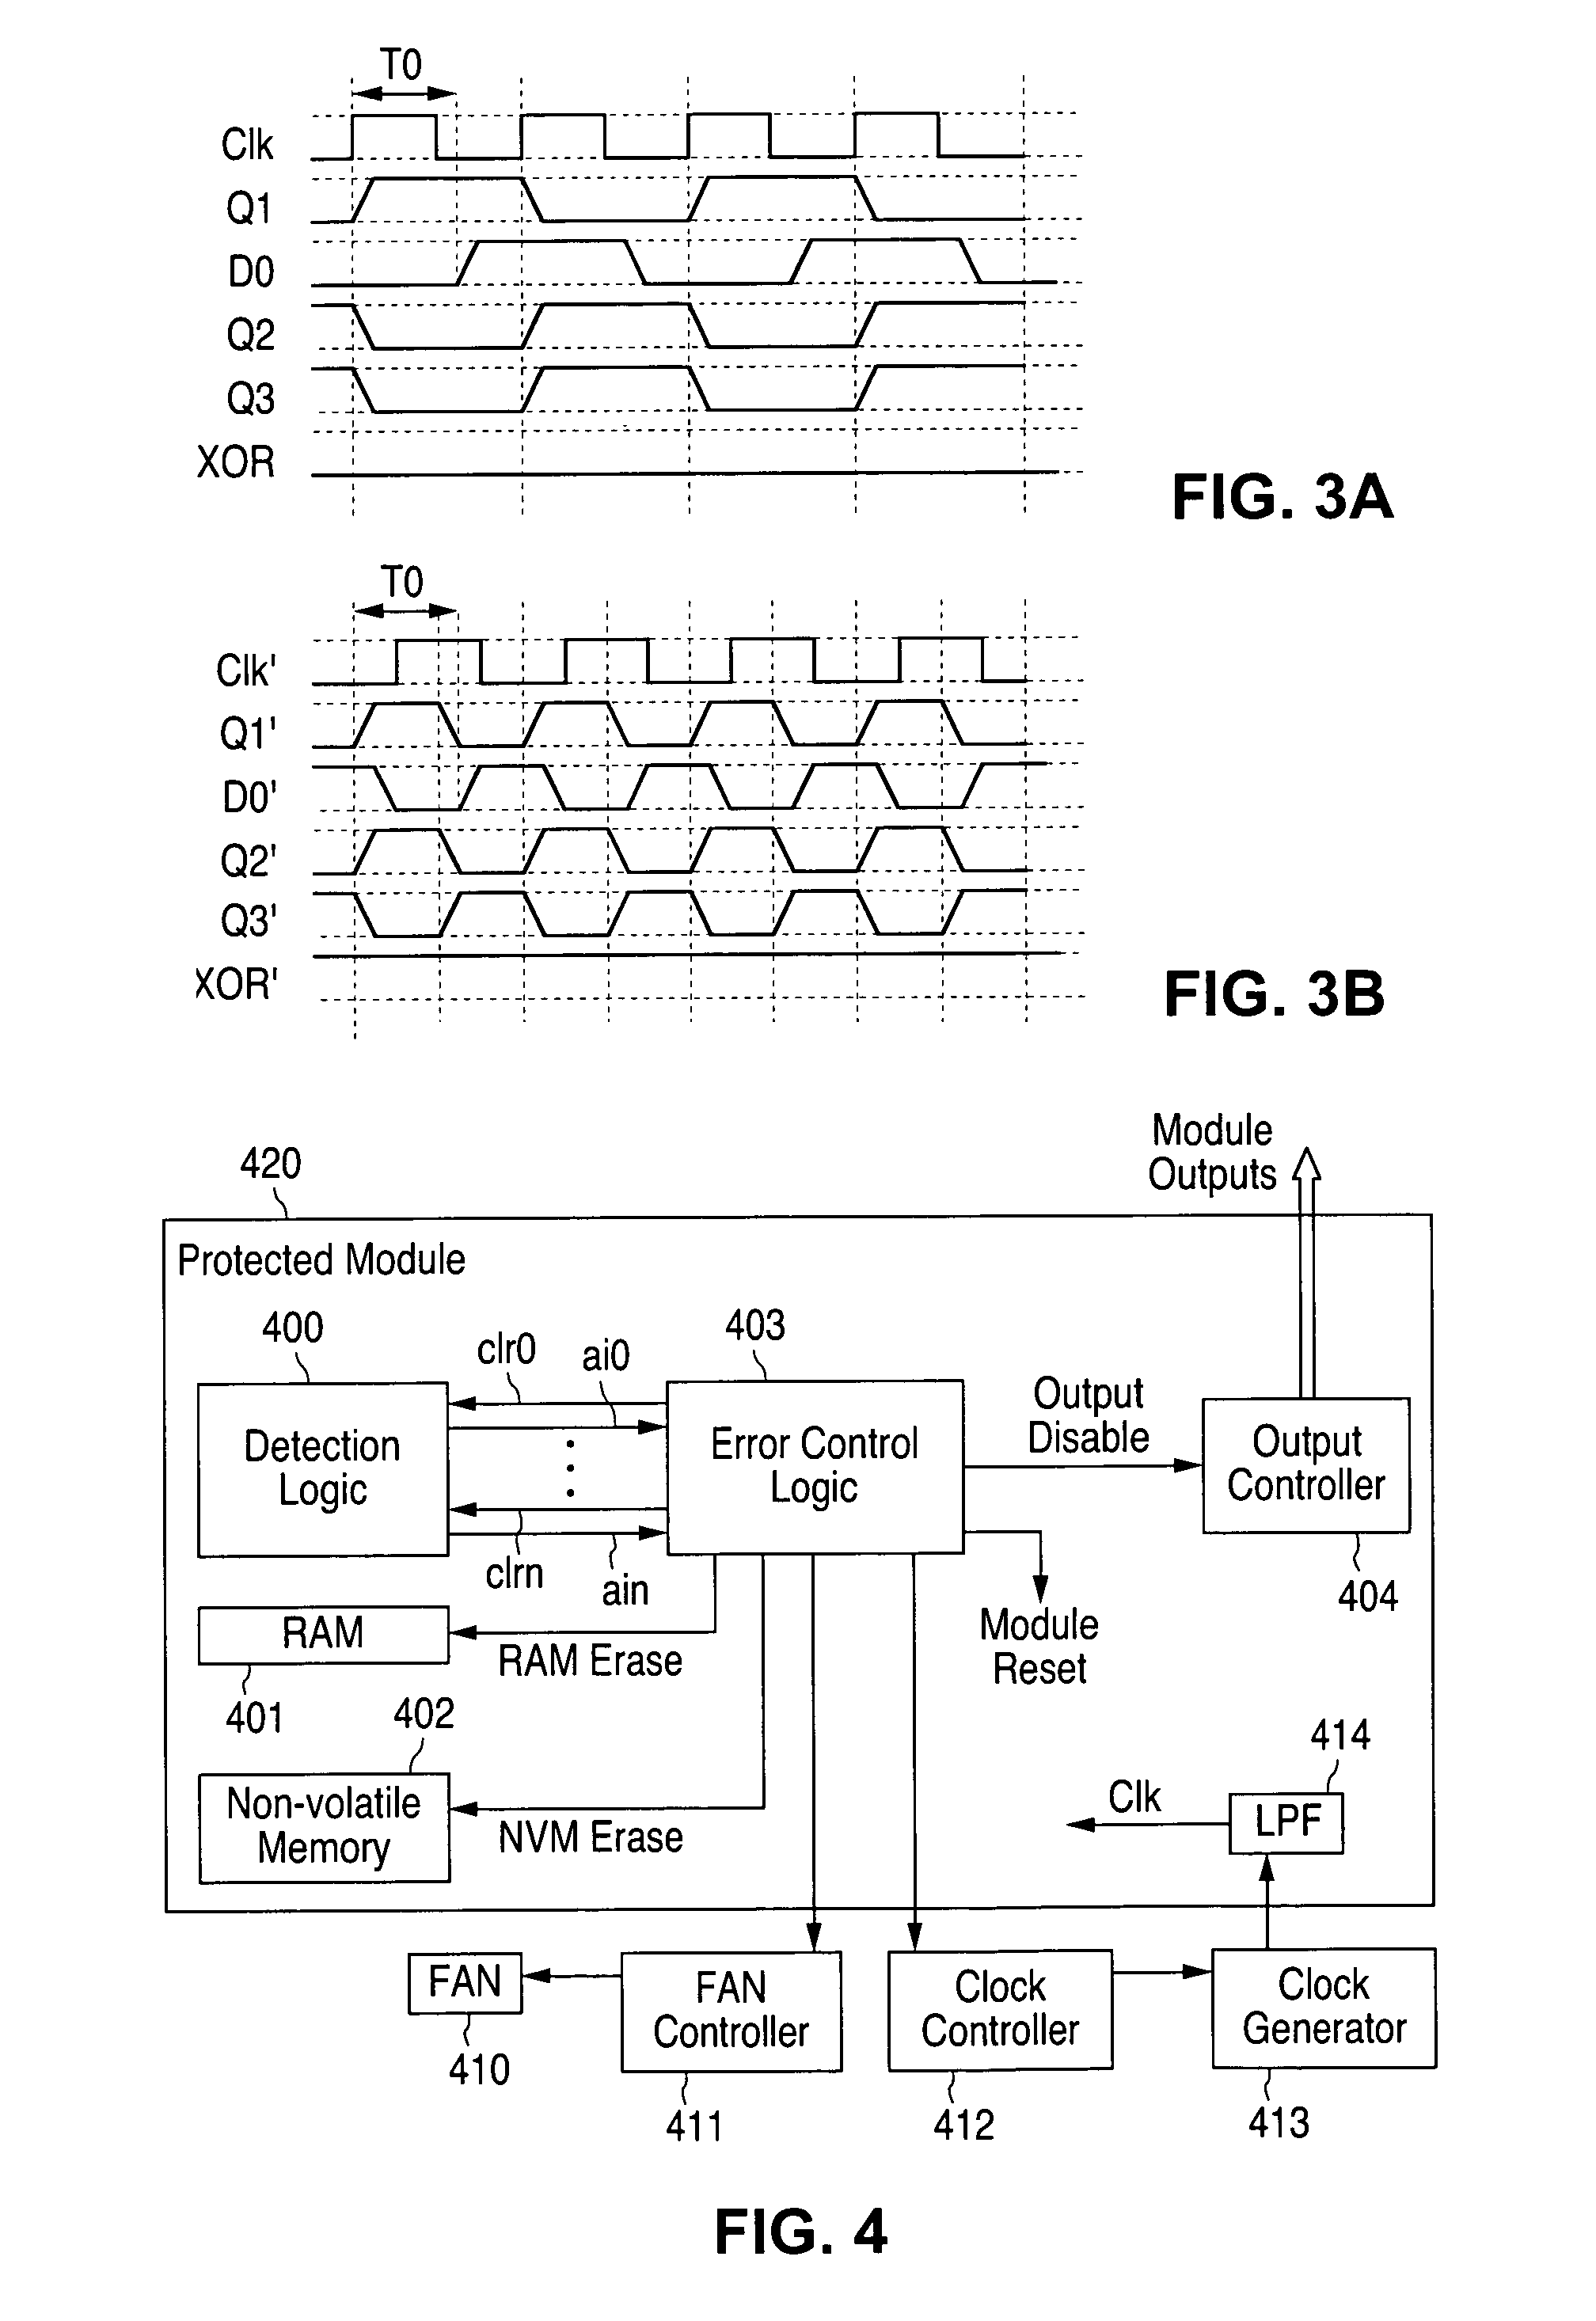 Circuitry and method for detecting and protecting against over-clocking attacks